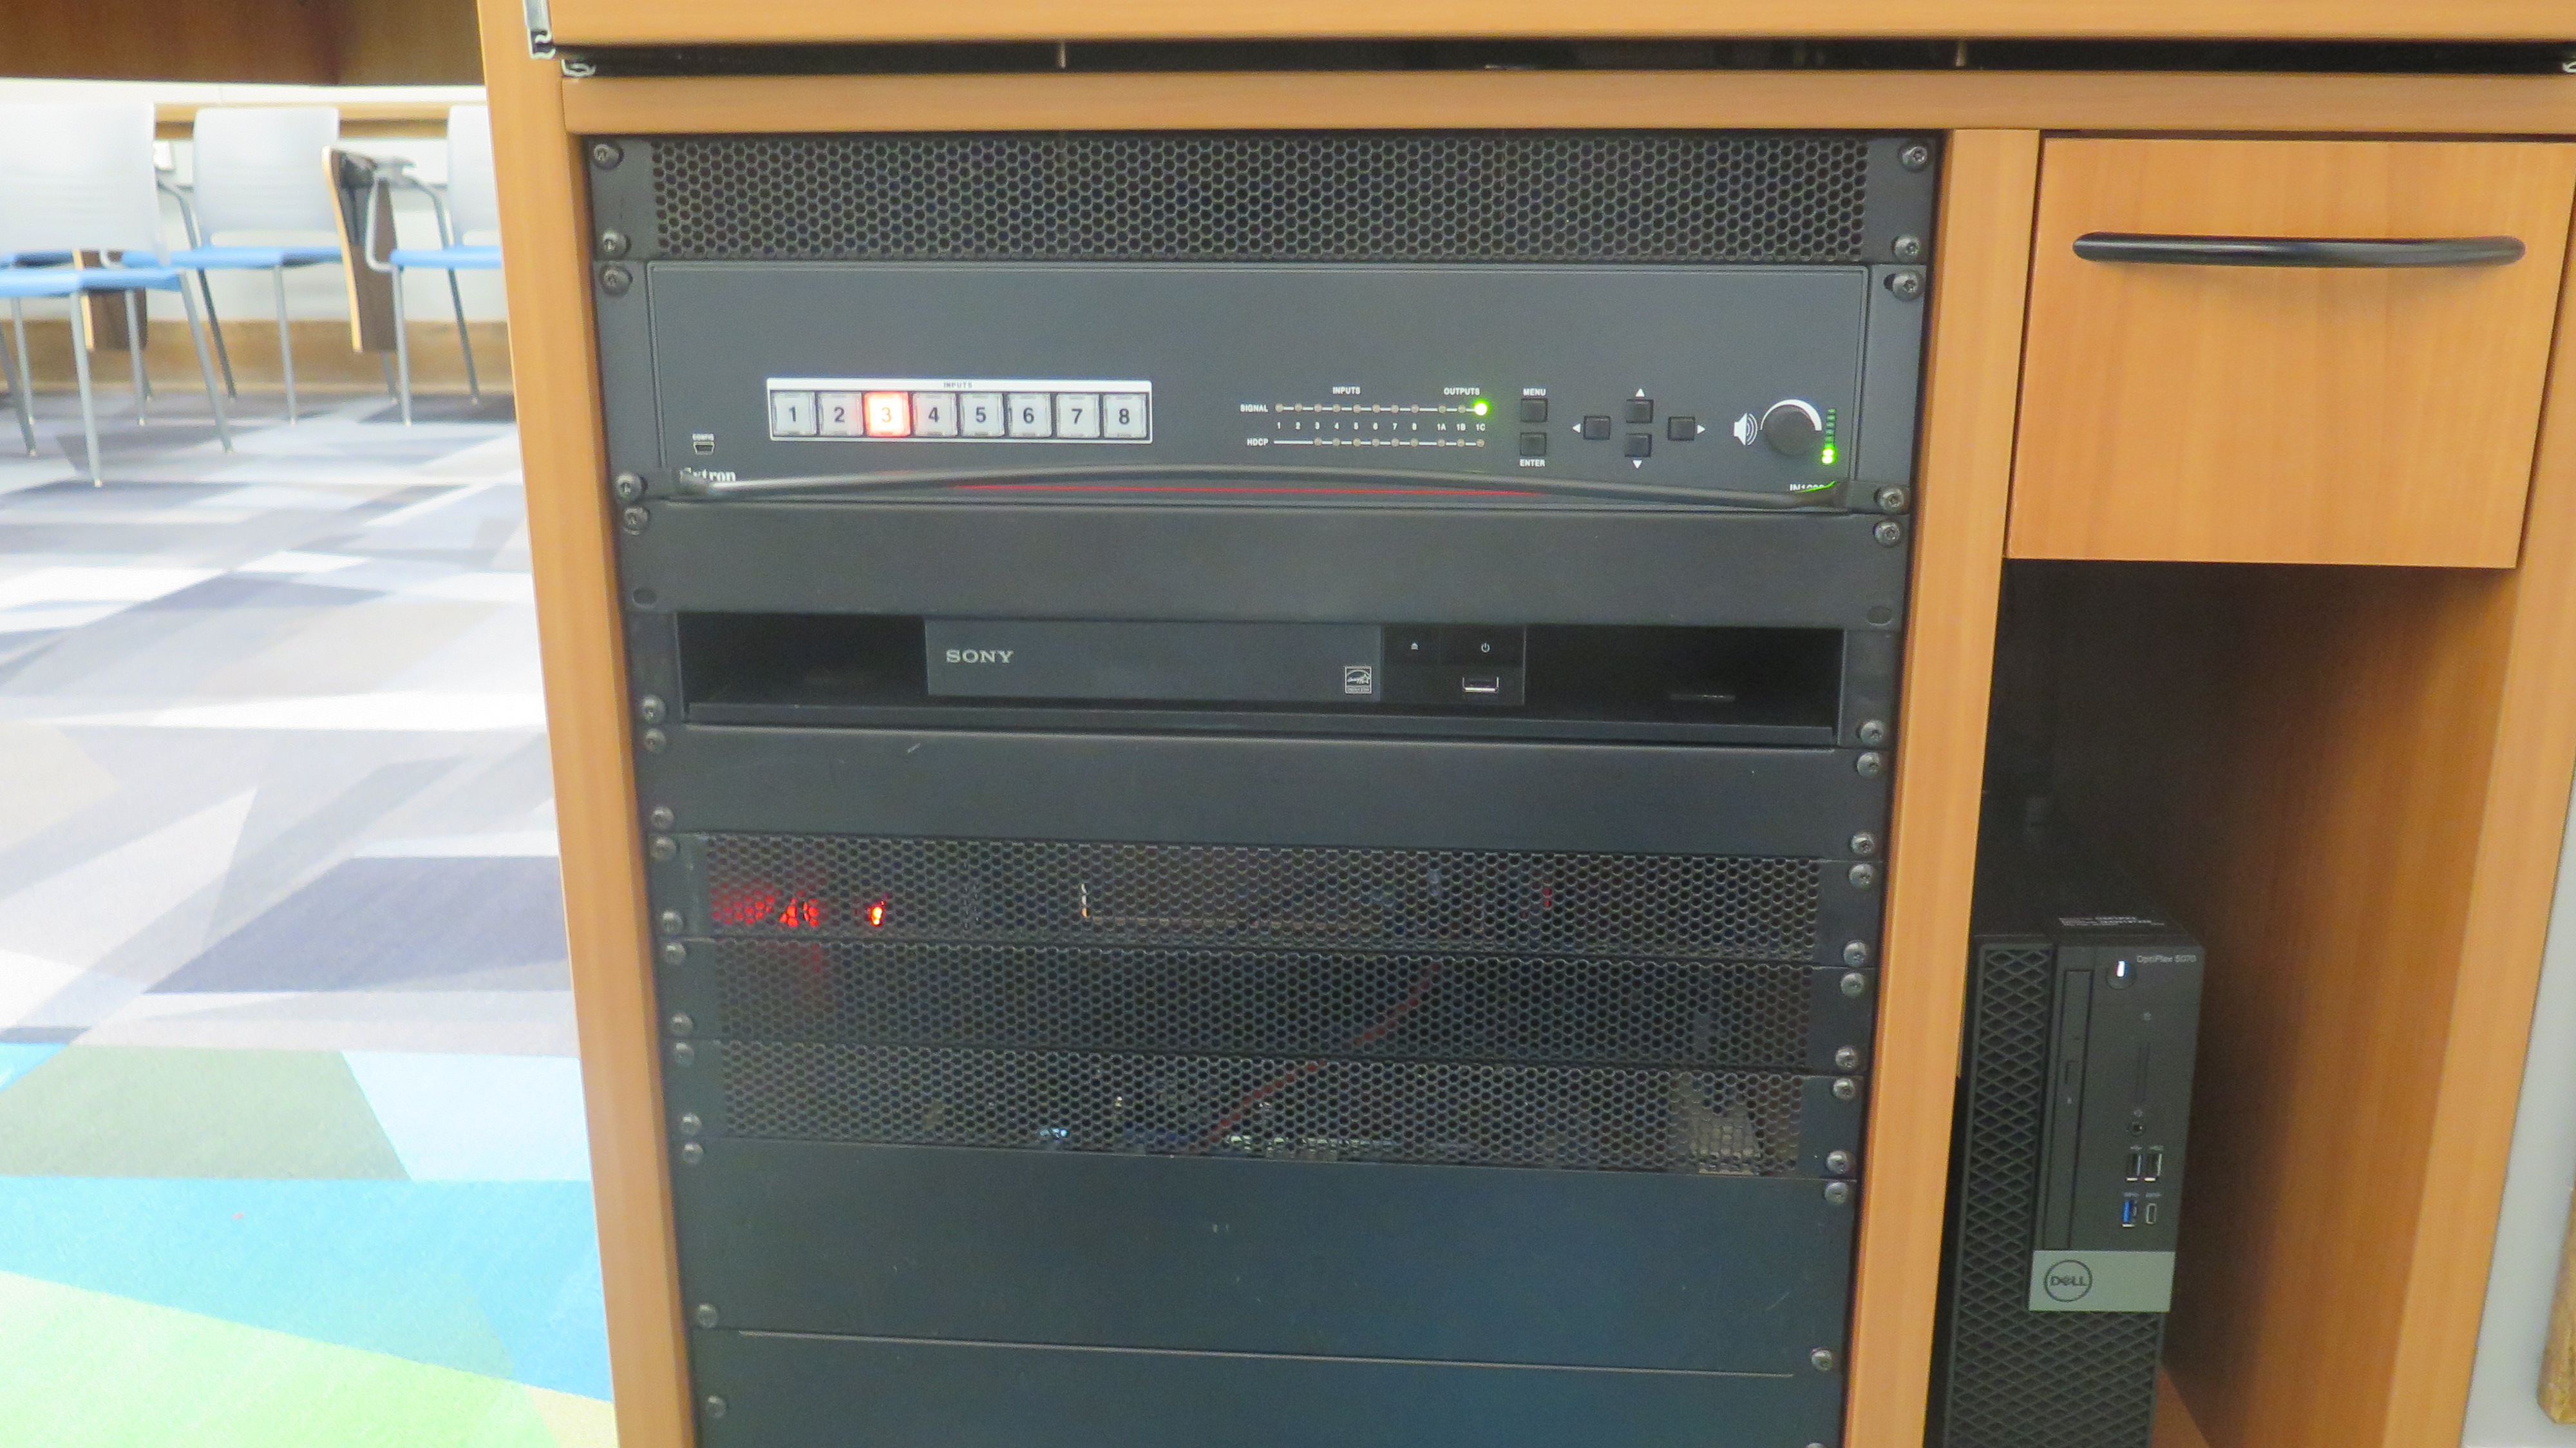 Front of Equipment rack showing AV Switcher. Below that is Blue-Ray/DVD Player. To the right is the compartment with the Dell Computer CPU.